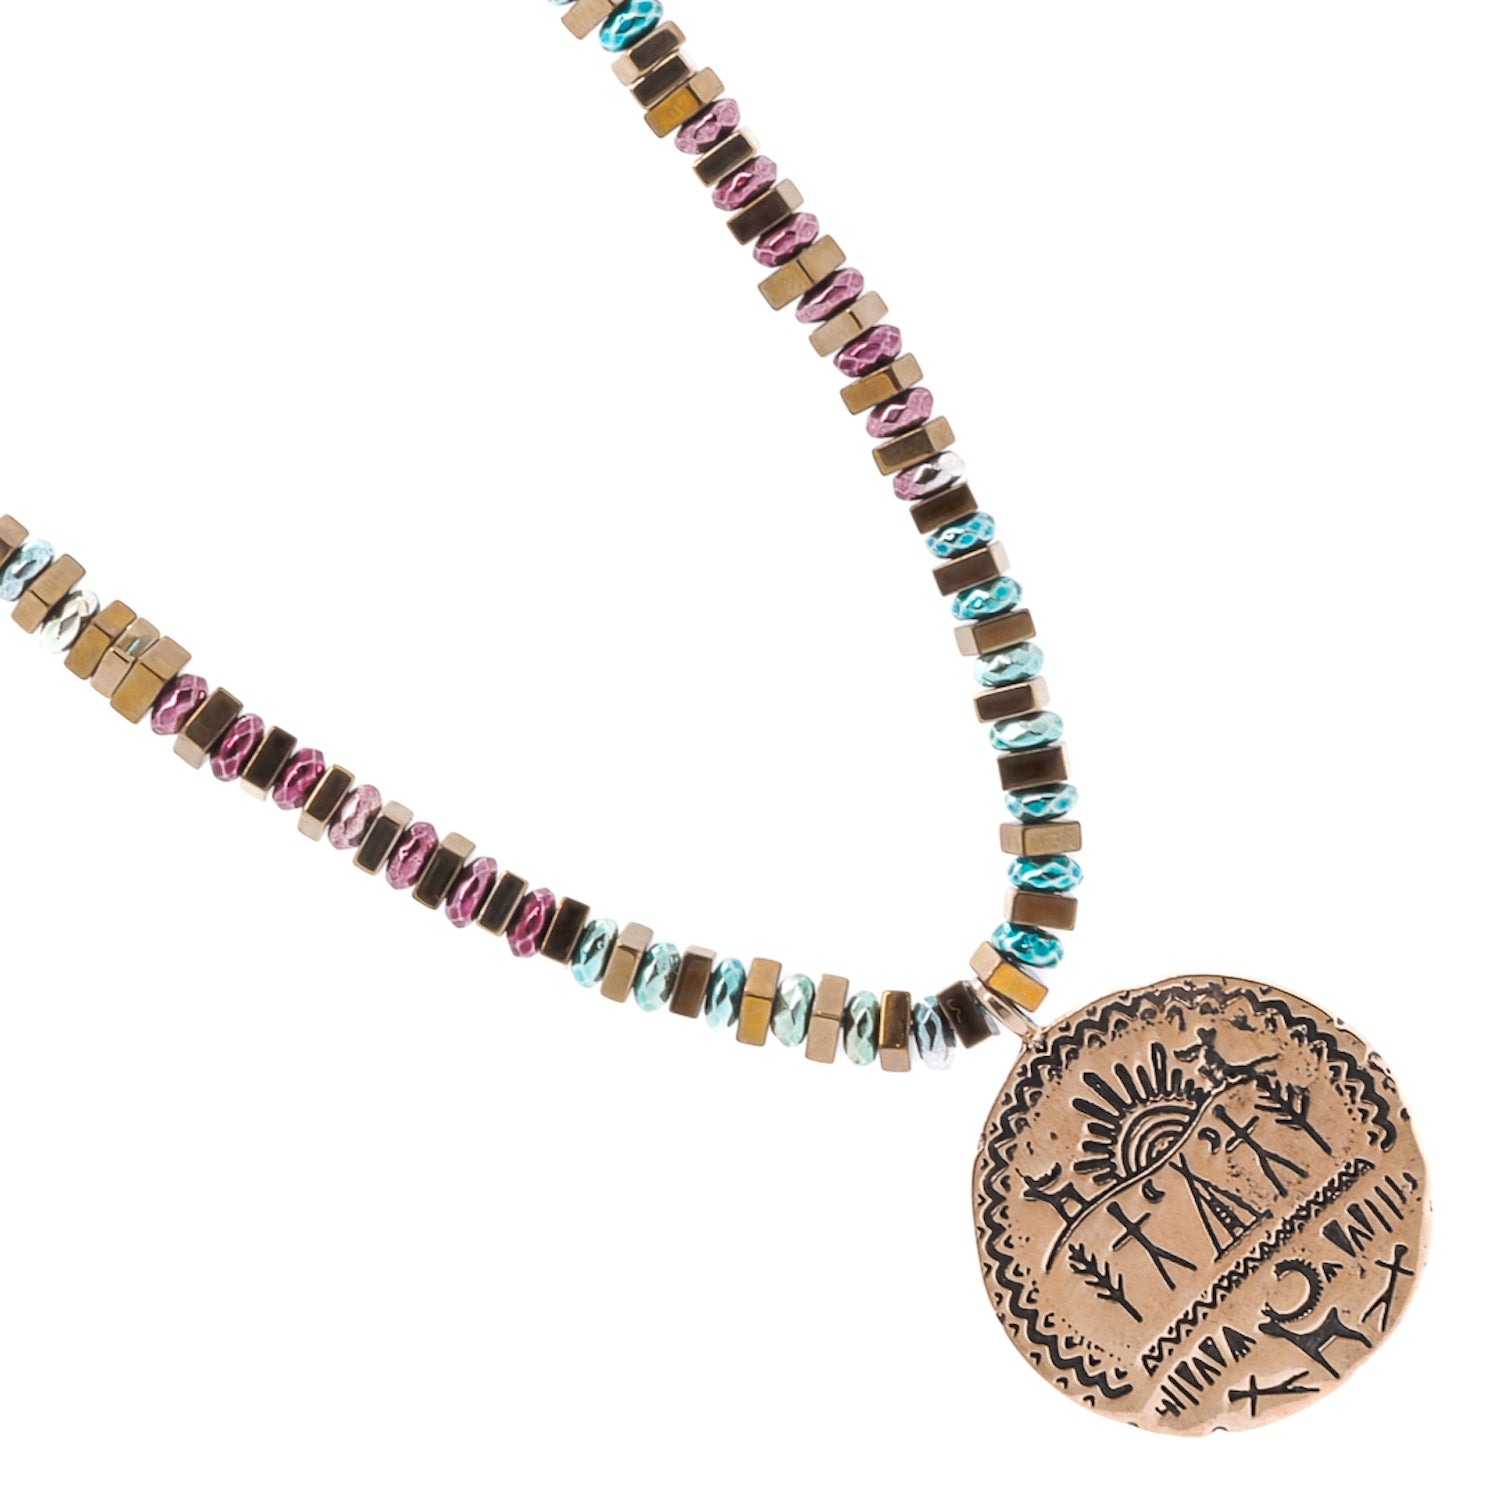 Empowering Shamanic Necklace - A Symbolic and Meaningful Accessory for Spiritual Seekers.